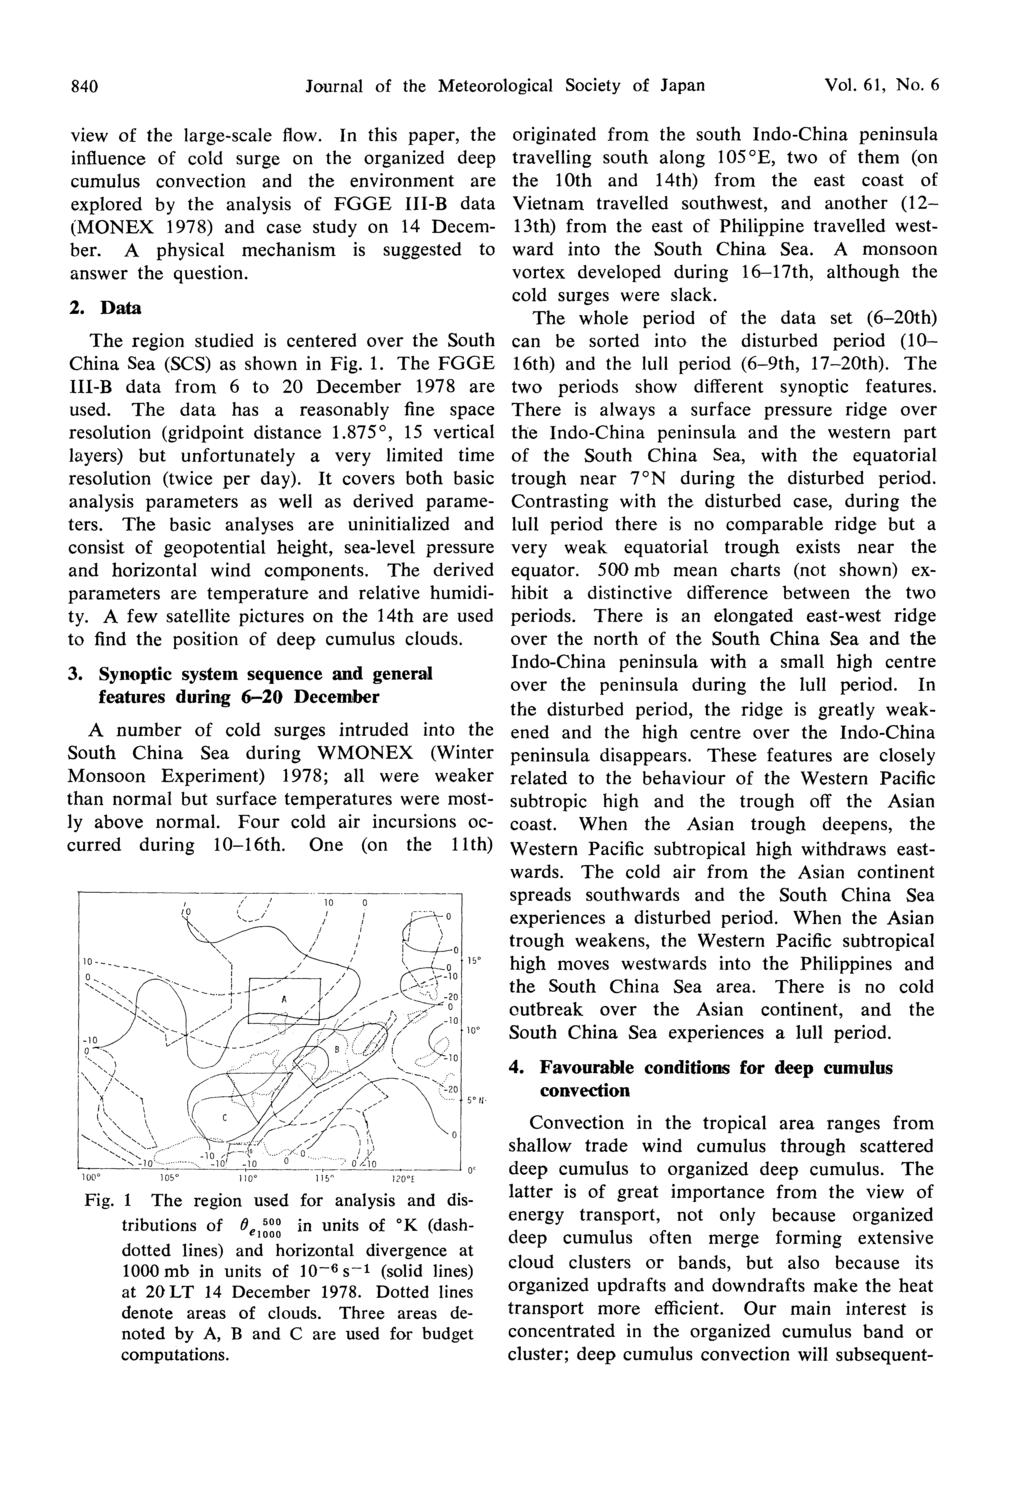 840 Journal of the Meteorological Society of Japan Vol. 61, No. 6 view of the large-scale flow.